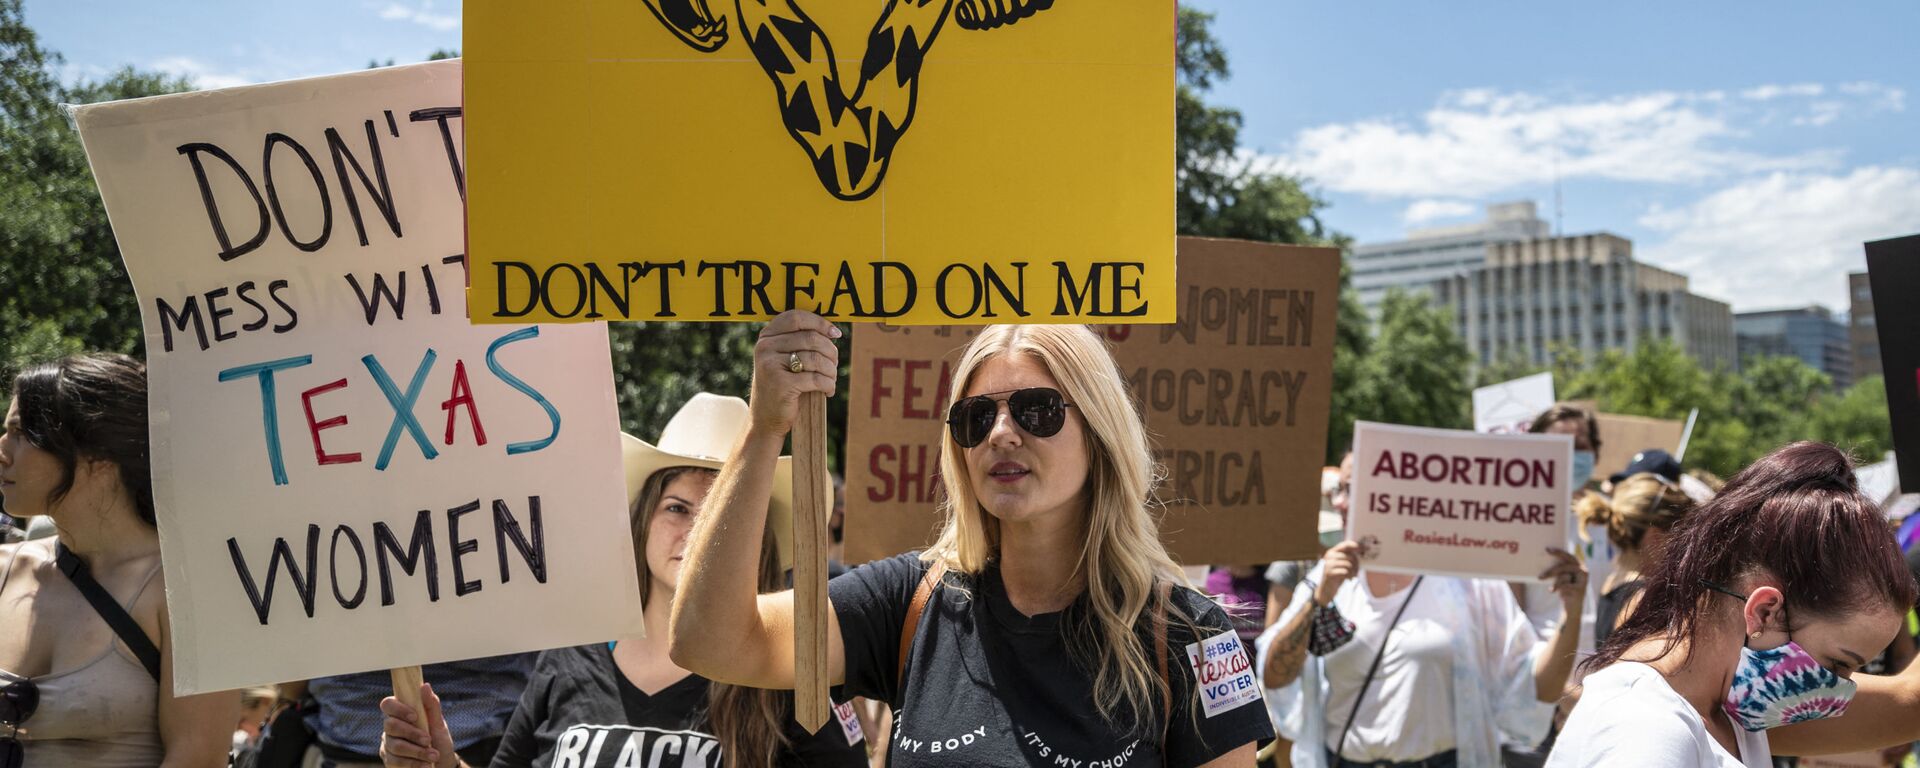 Protesters hold up signs at a protest outside the Texas state capitol on May 29, 2021 in Austin, Texas. - Sputnik International, 1920, 09.09.2021